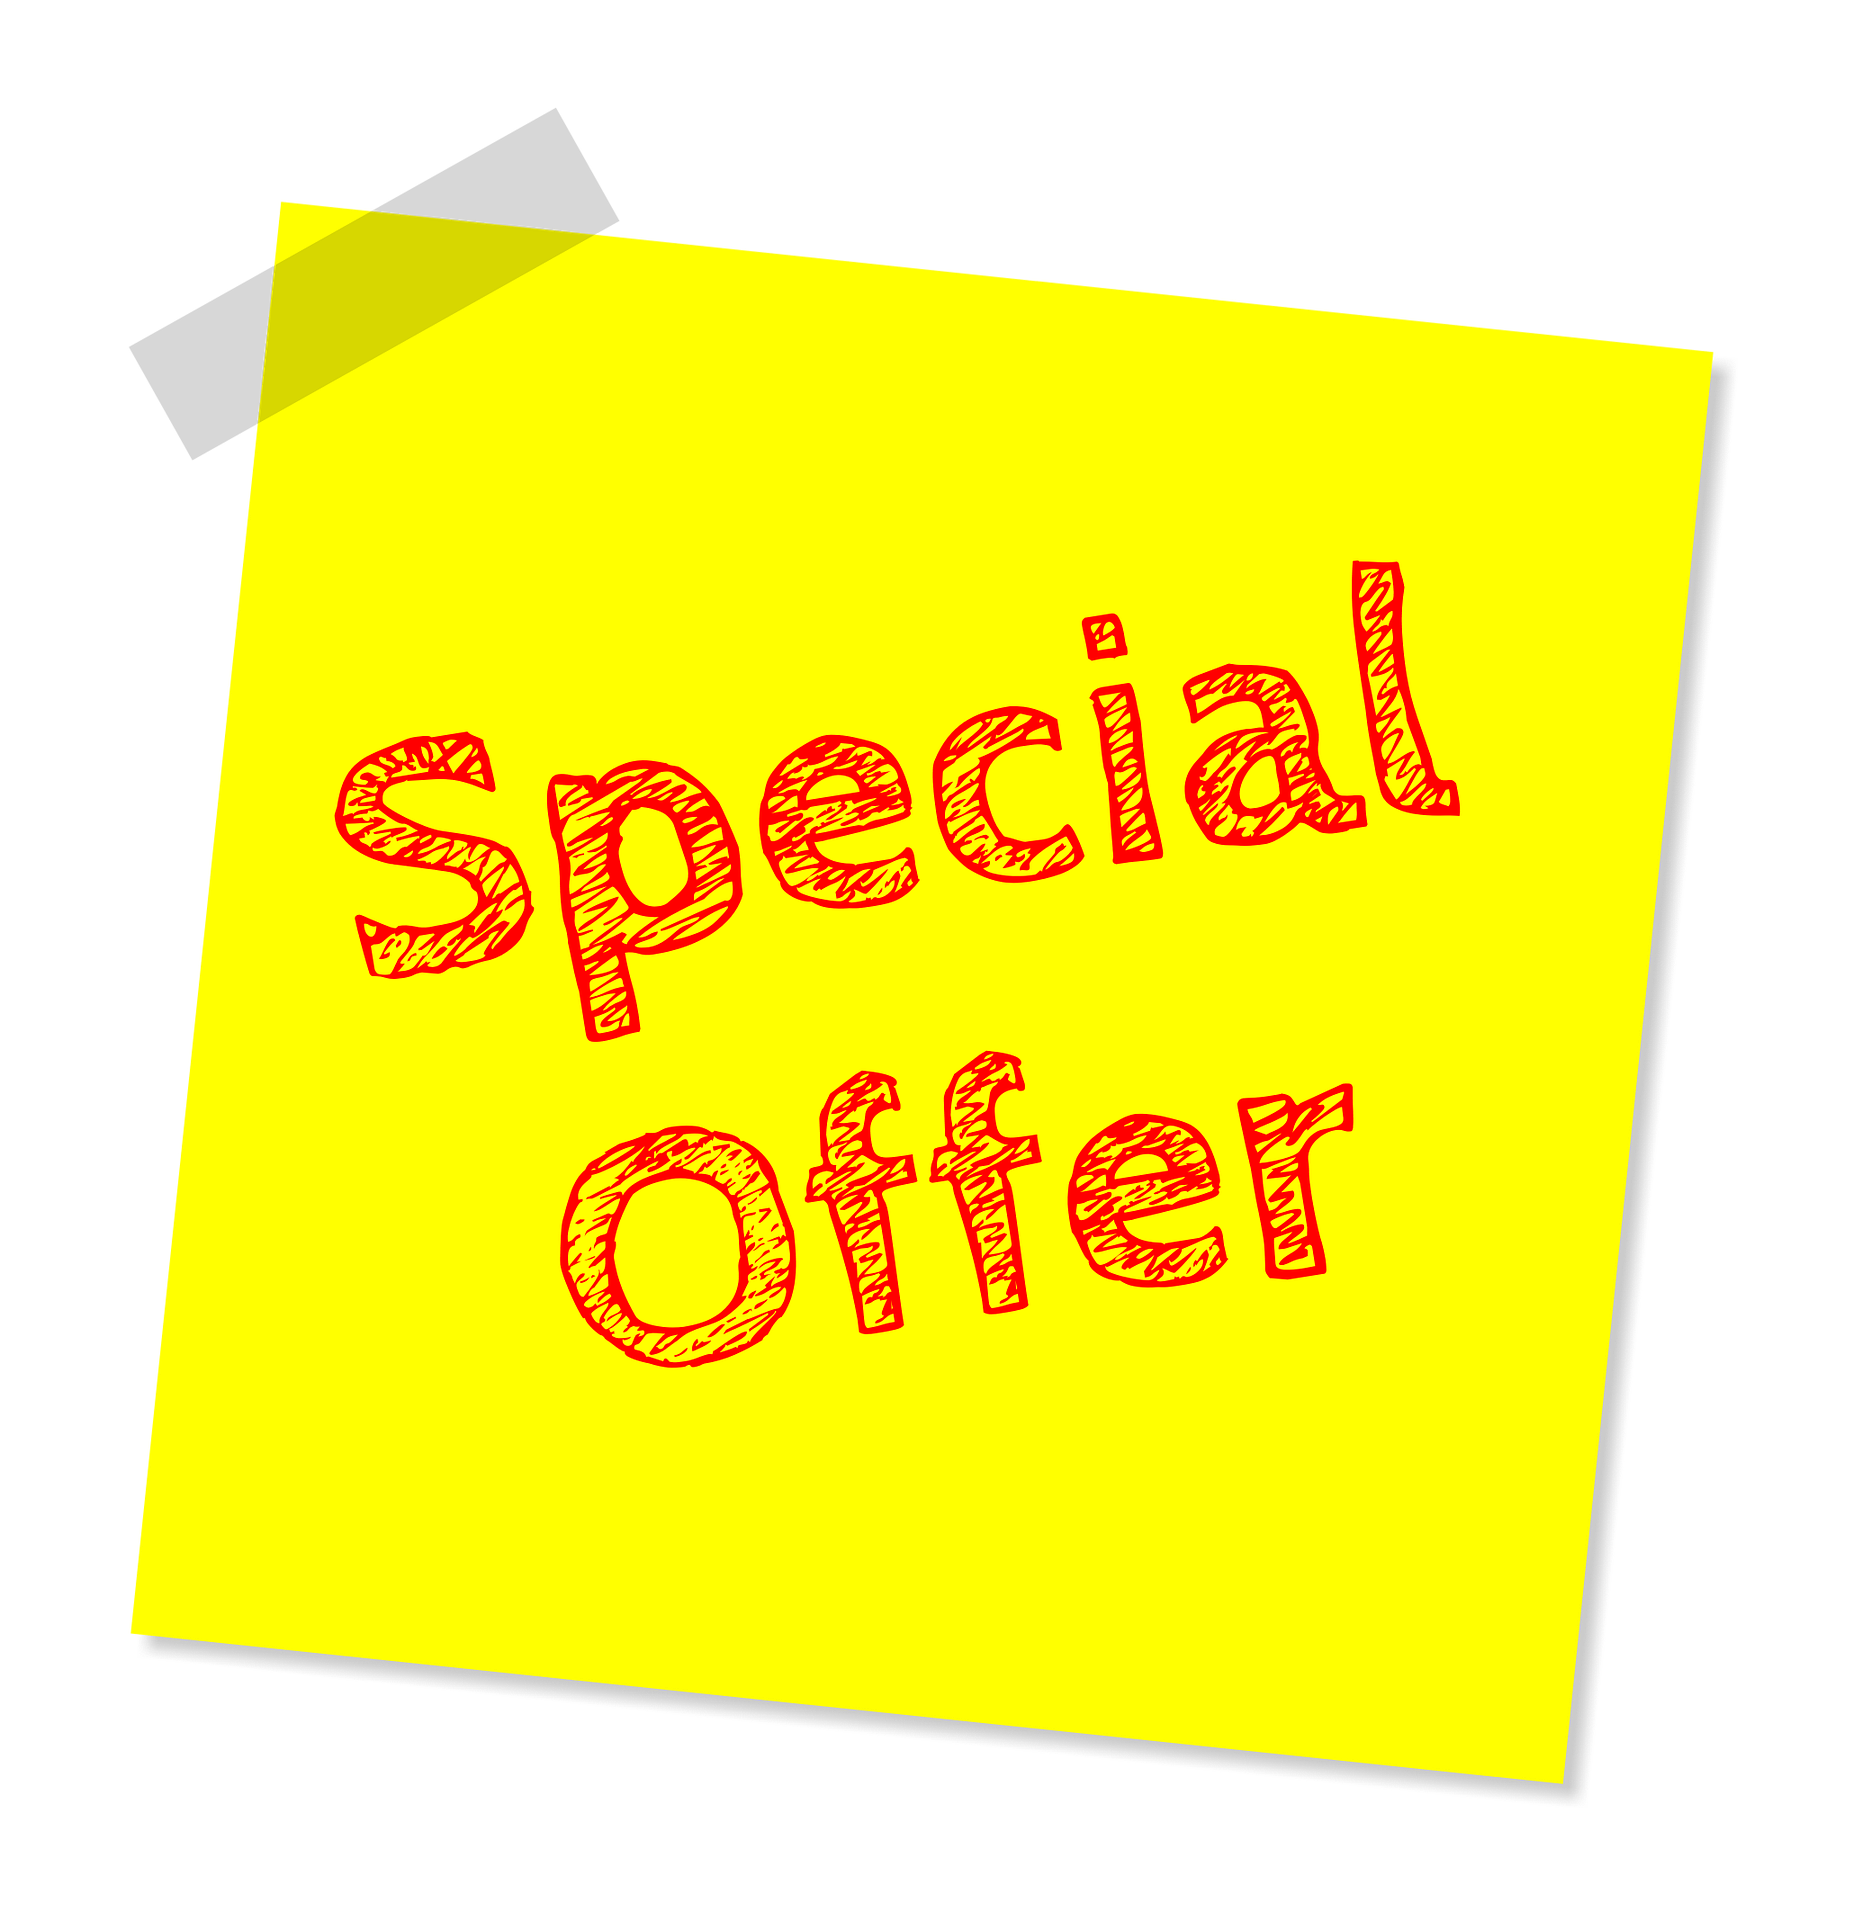 special-offer-1422378_1920